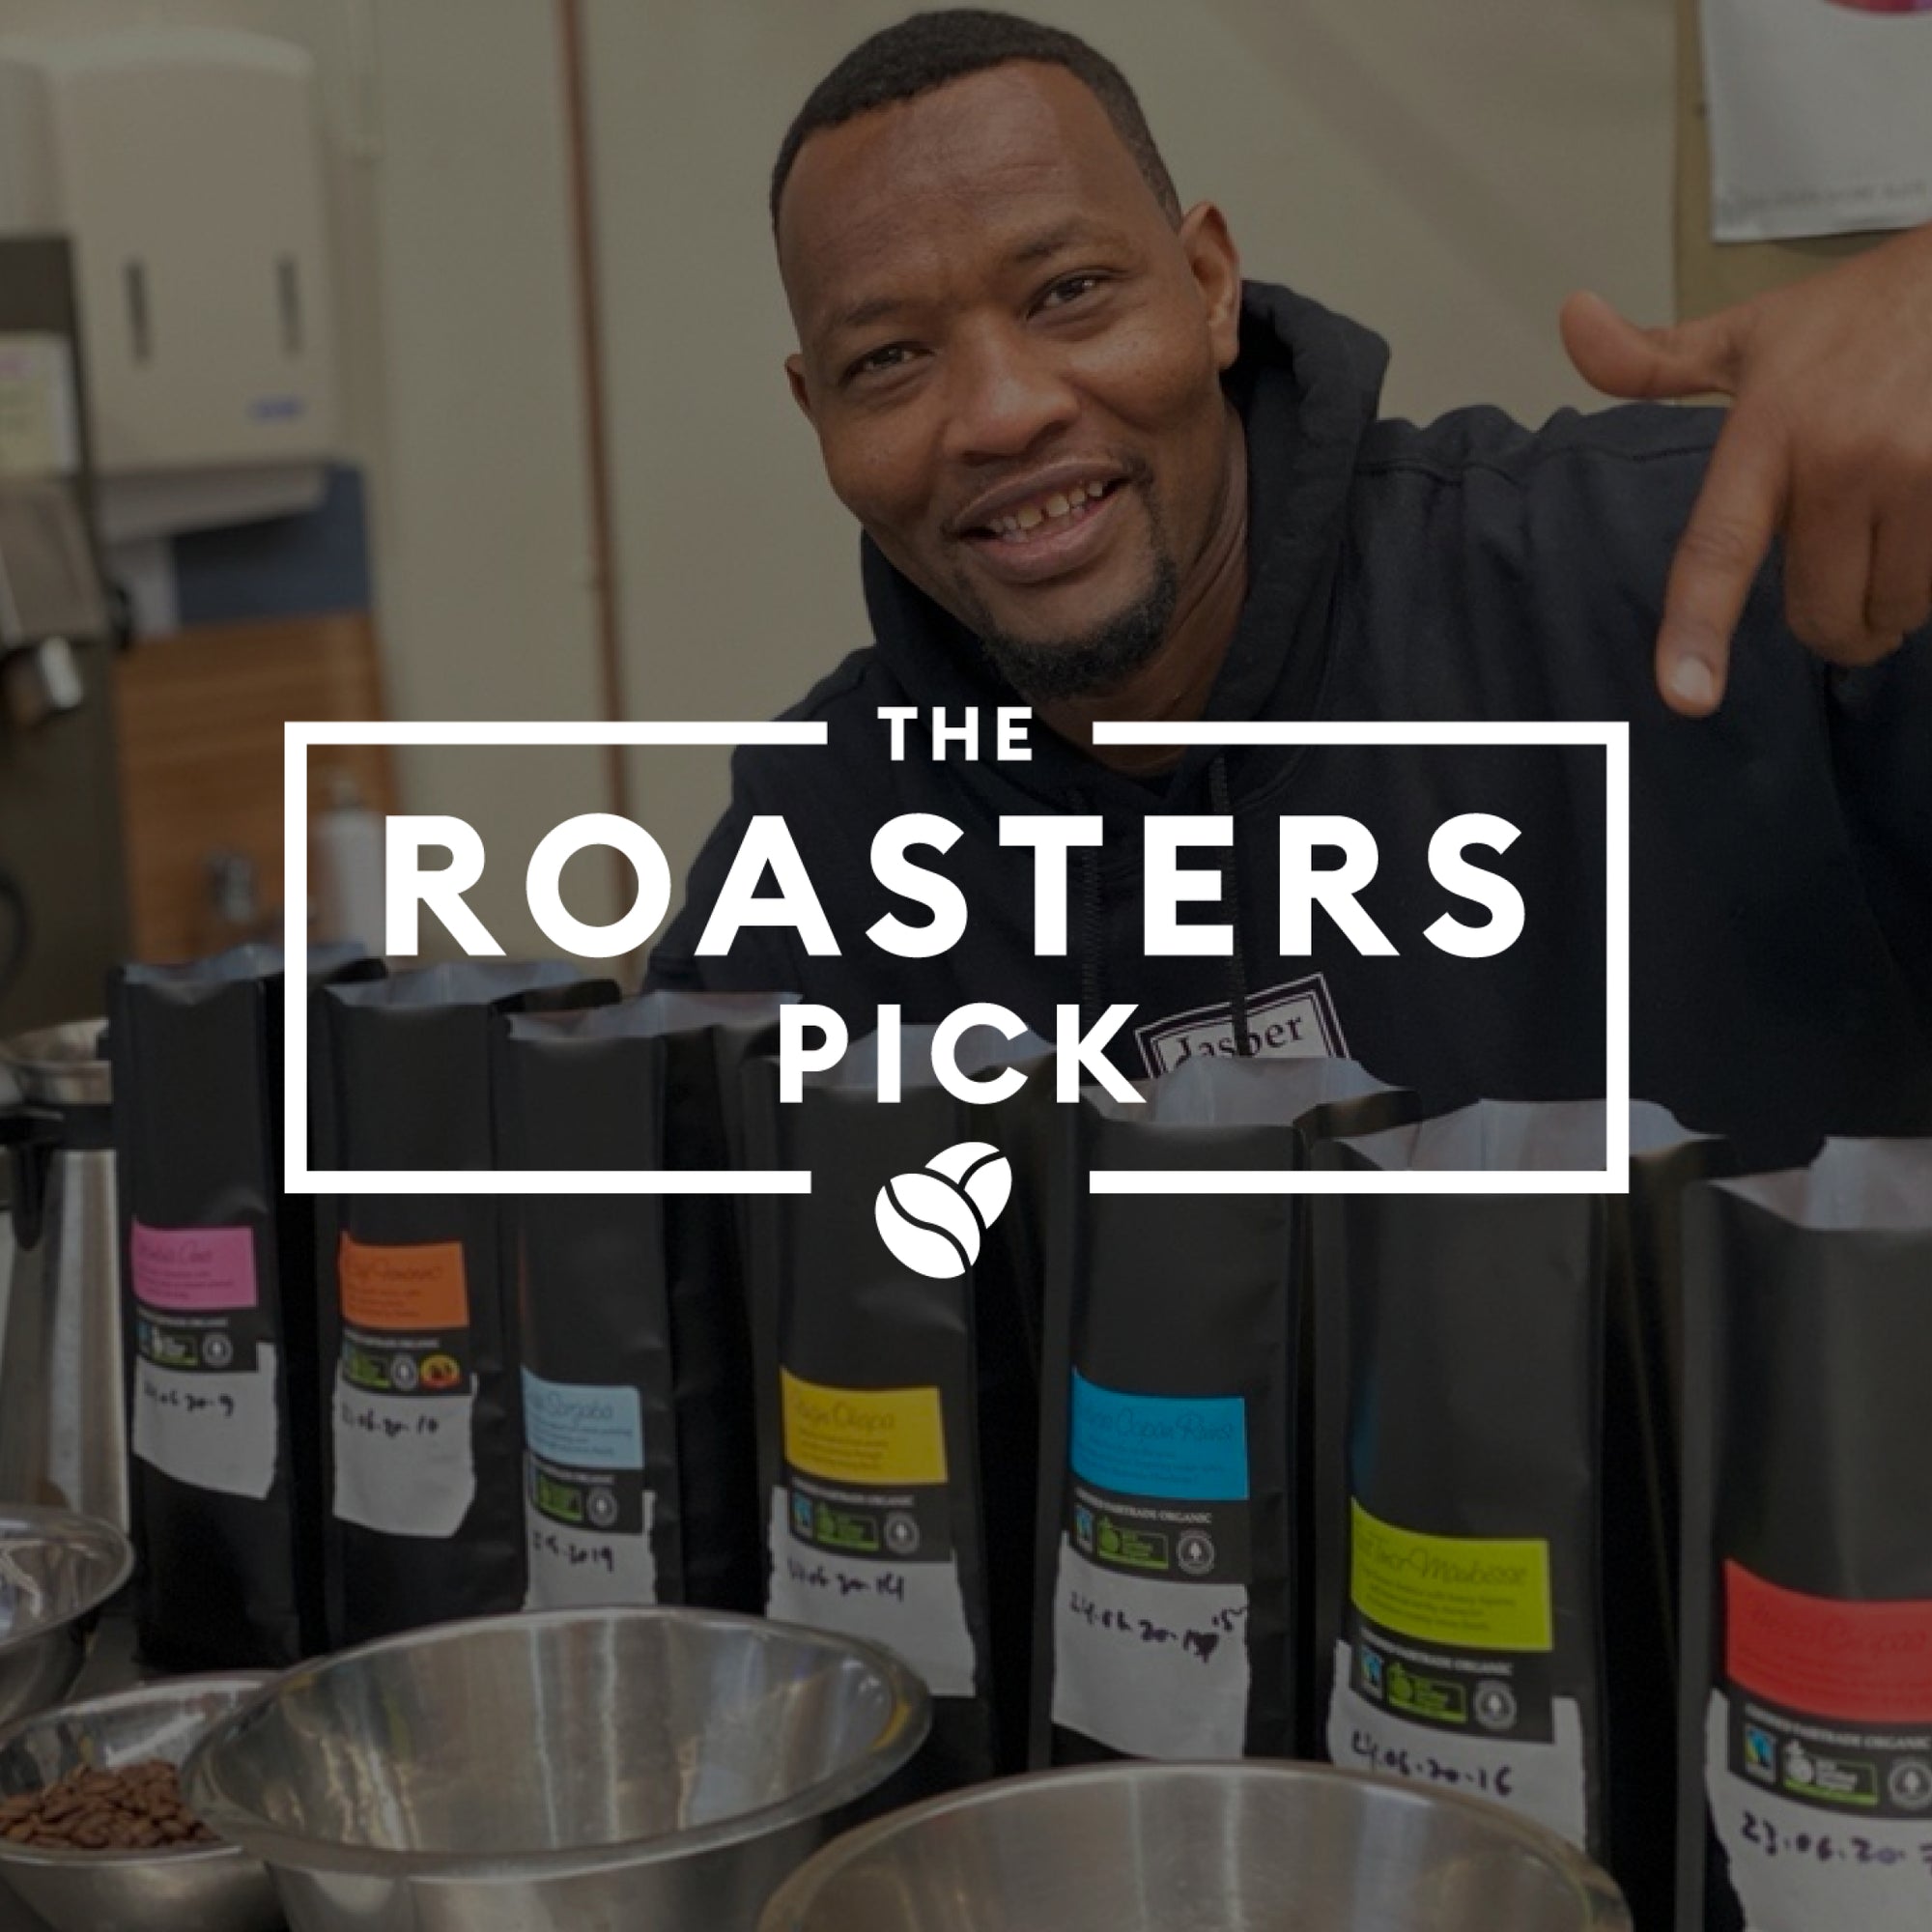 The Roasters Pick Subscription